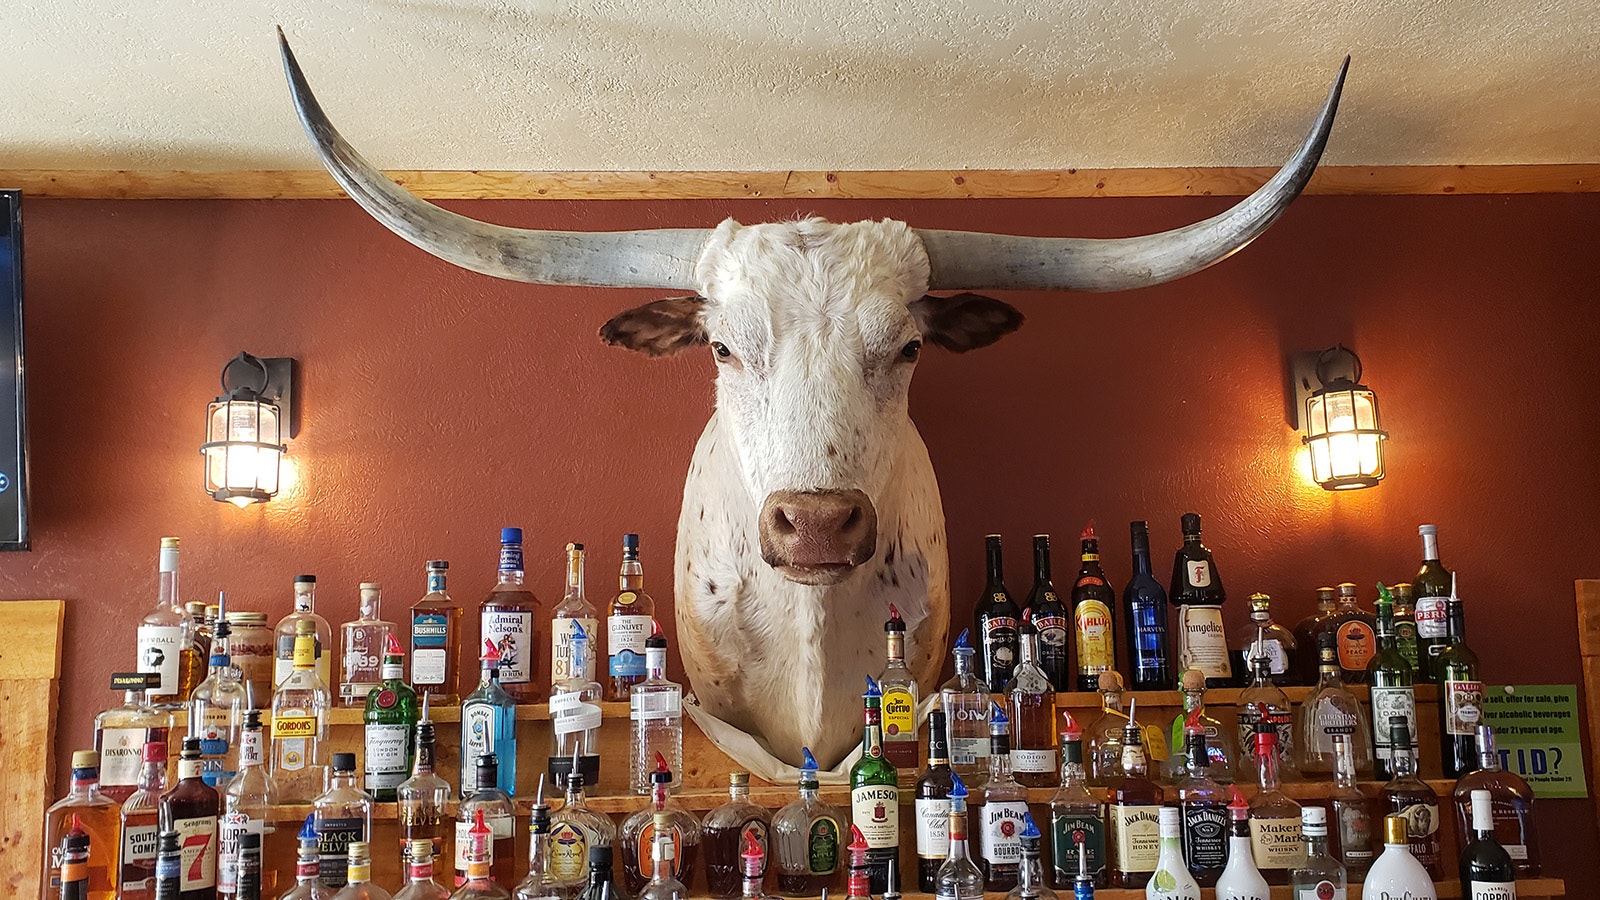 The bull's head at the Bull Pub in Cowley, Wyoming.